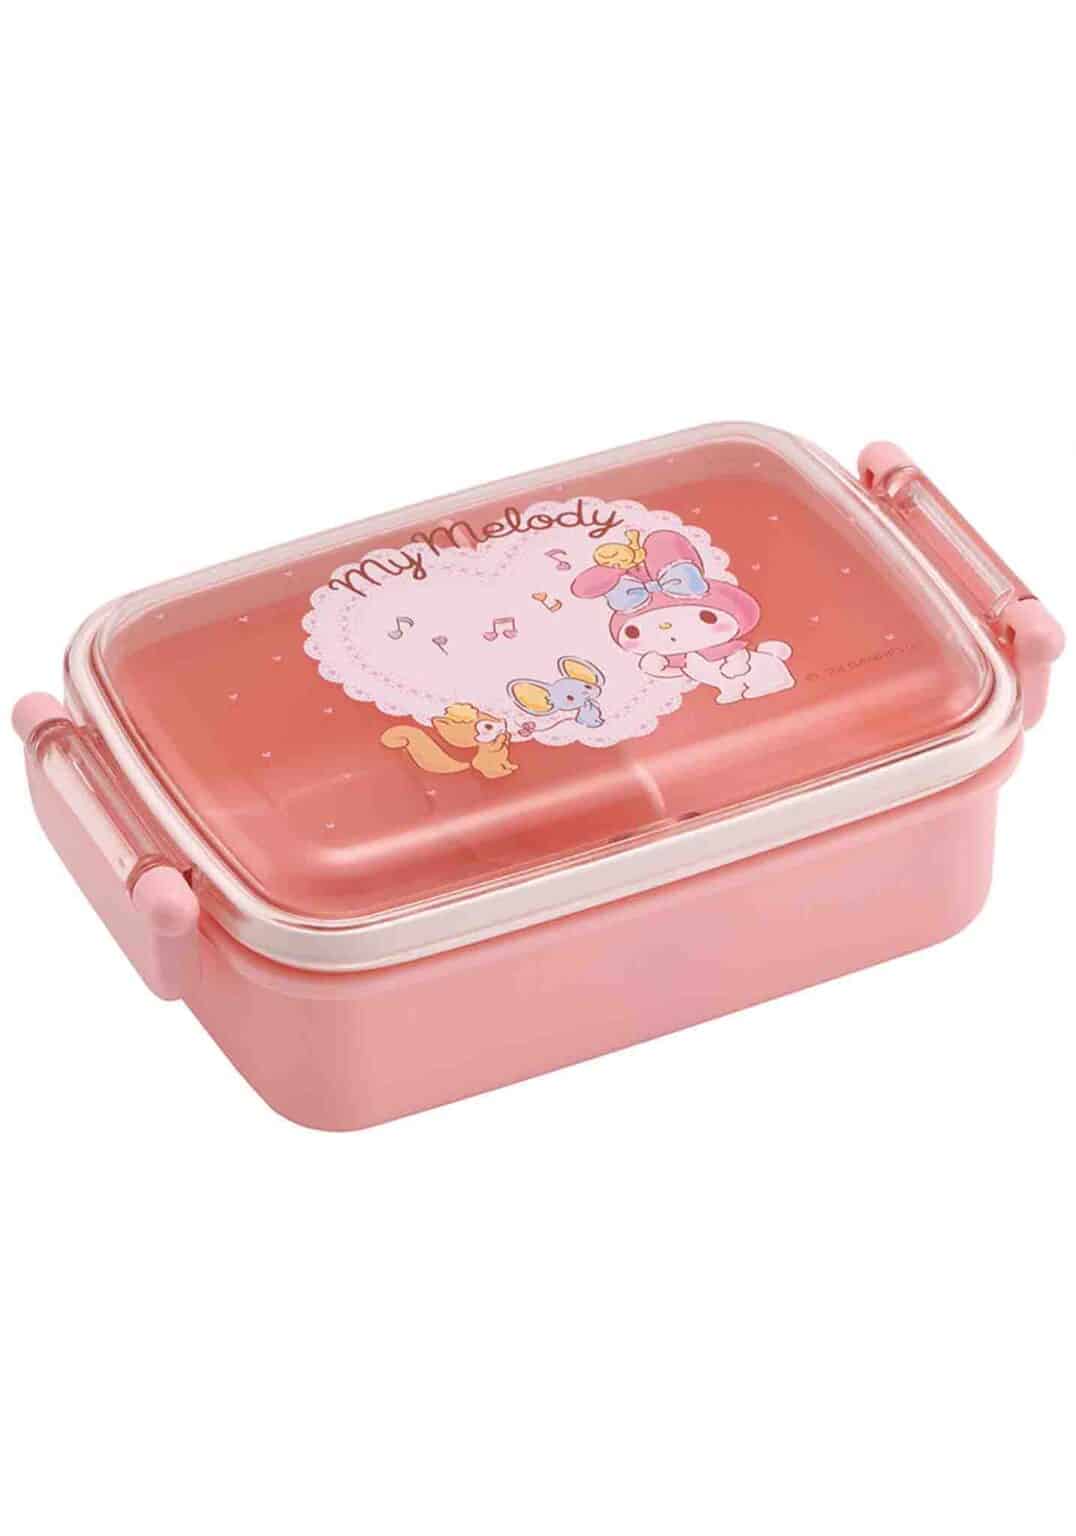 Clever Idiots My Melody Music Bento Lunch Box Kawaii Gifts 4973307600319